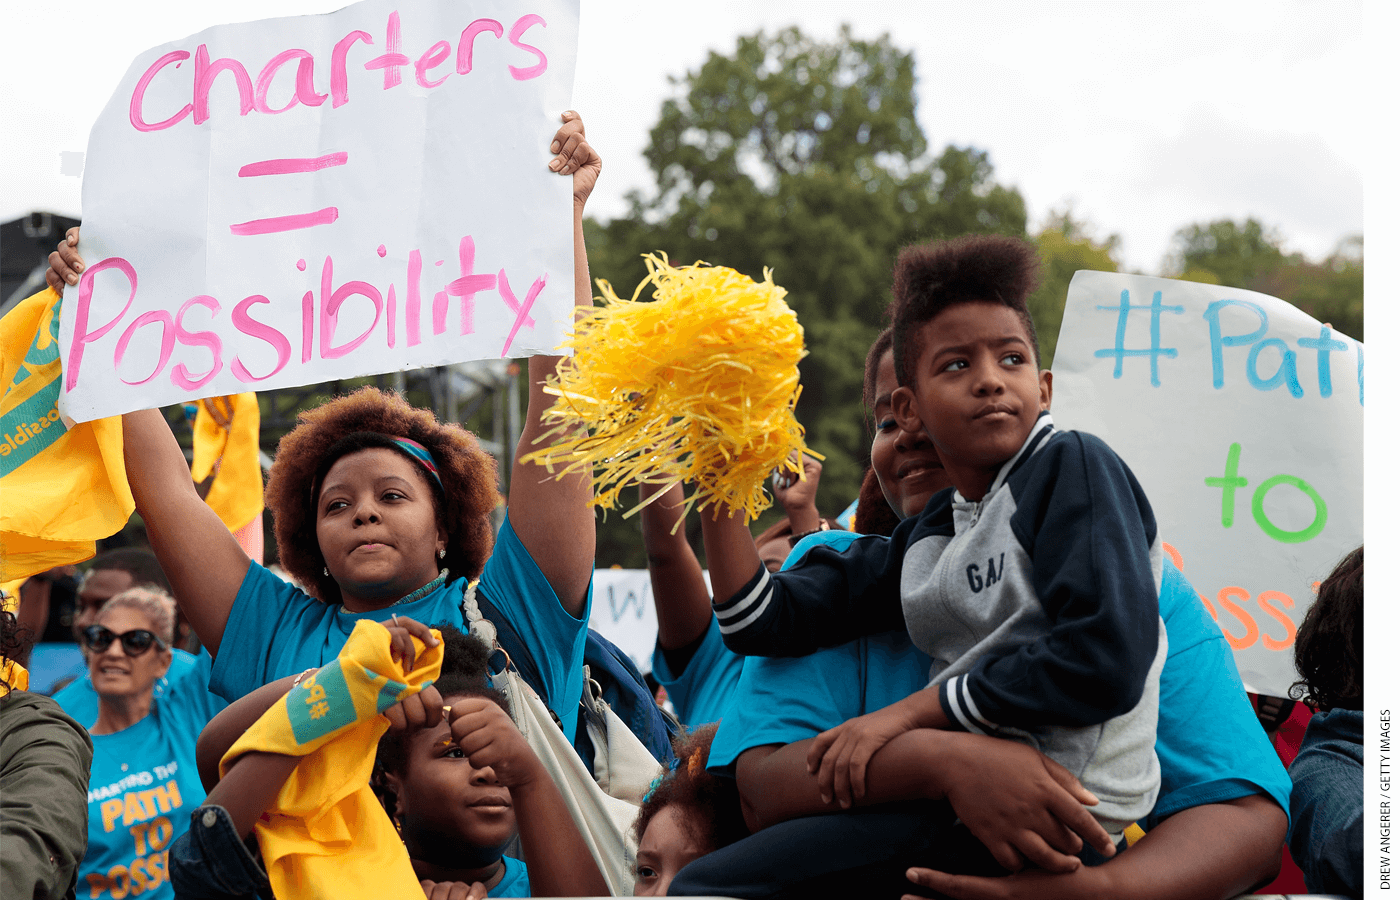 Parents and schoolchildren demonstrate their support for charter schools and protest the racial achievement gap in New York City.